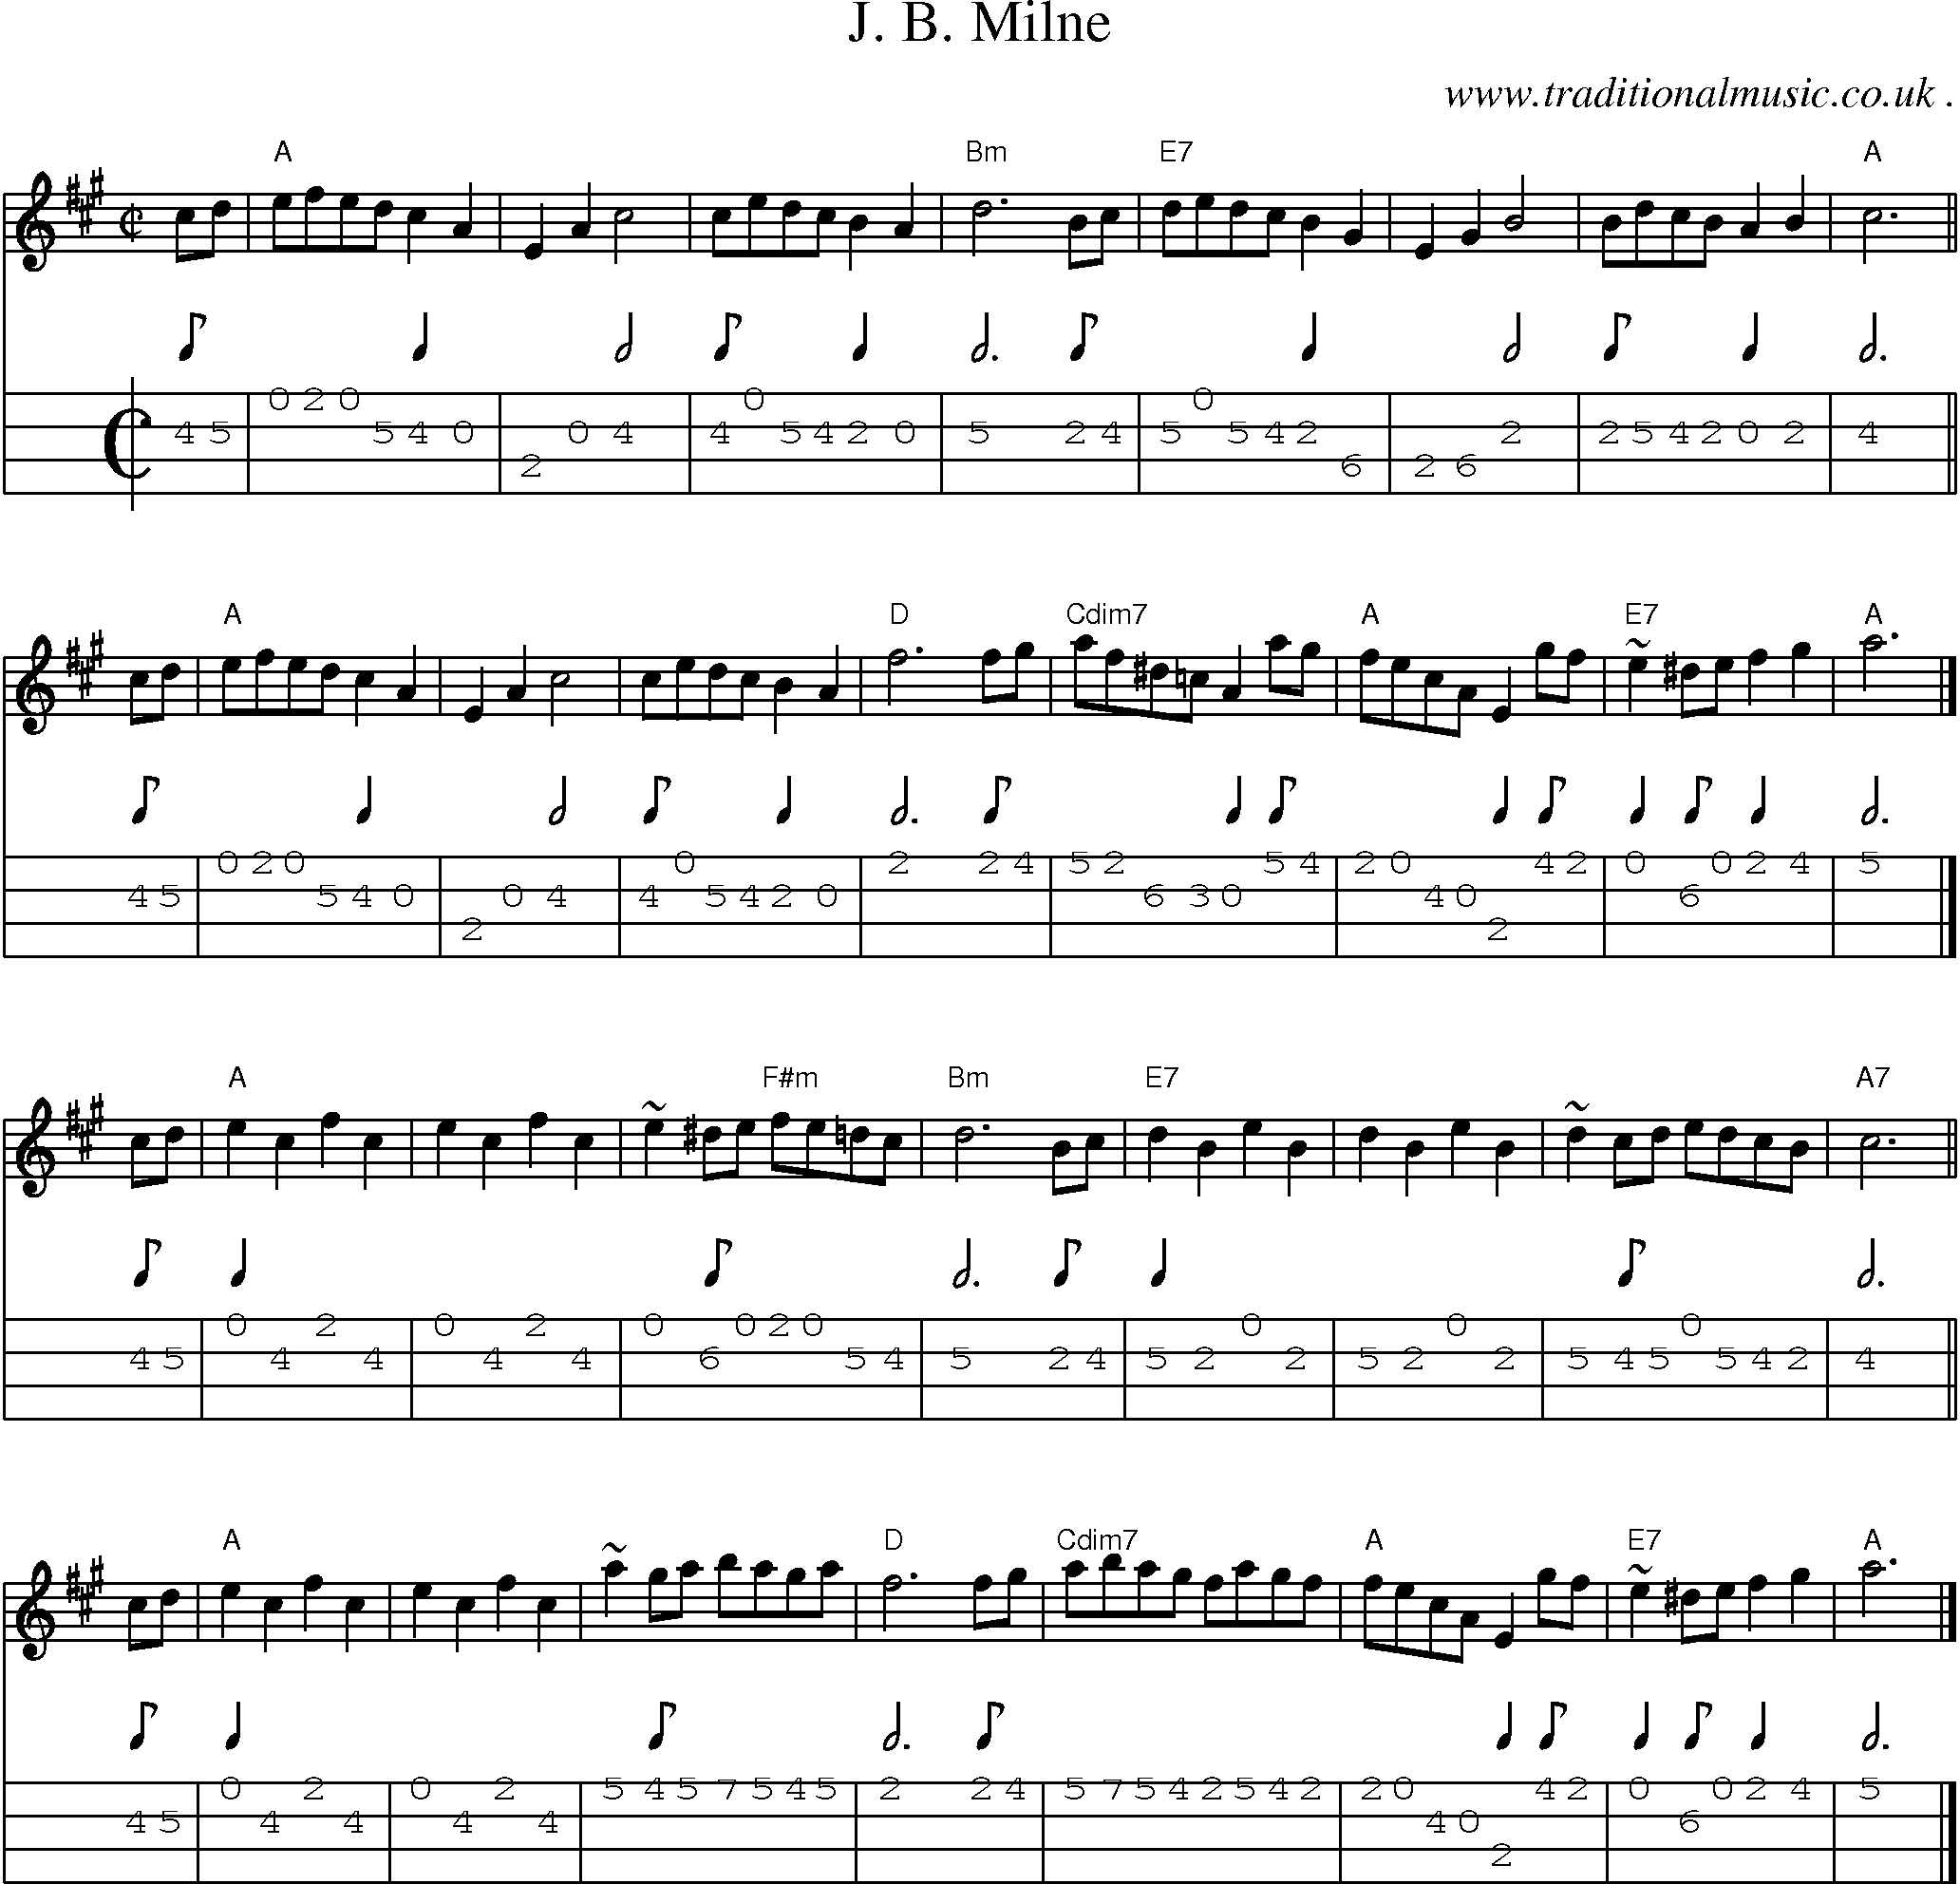 Sheet-music  score, Chords and Mandolin Tabs for J B Milne